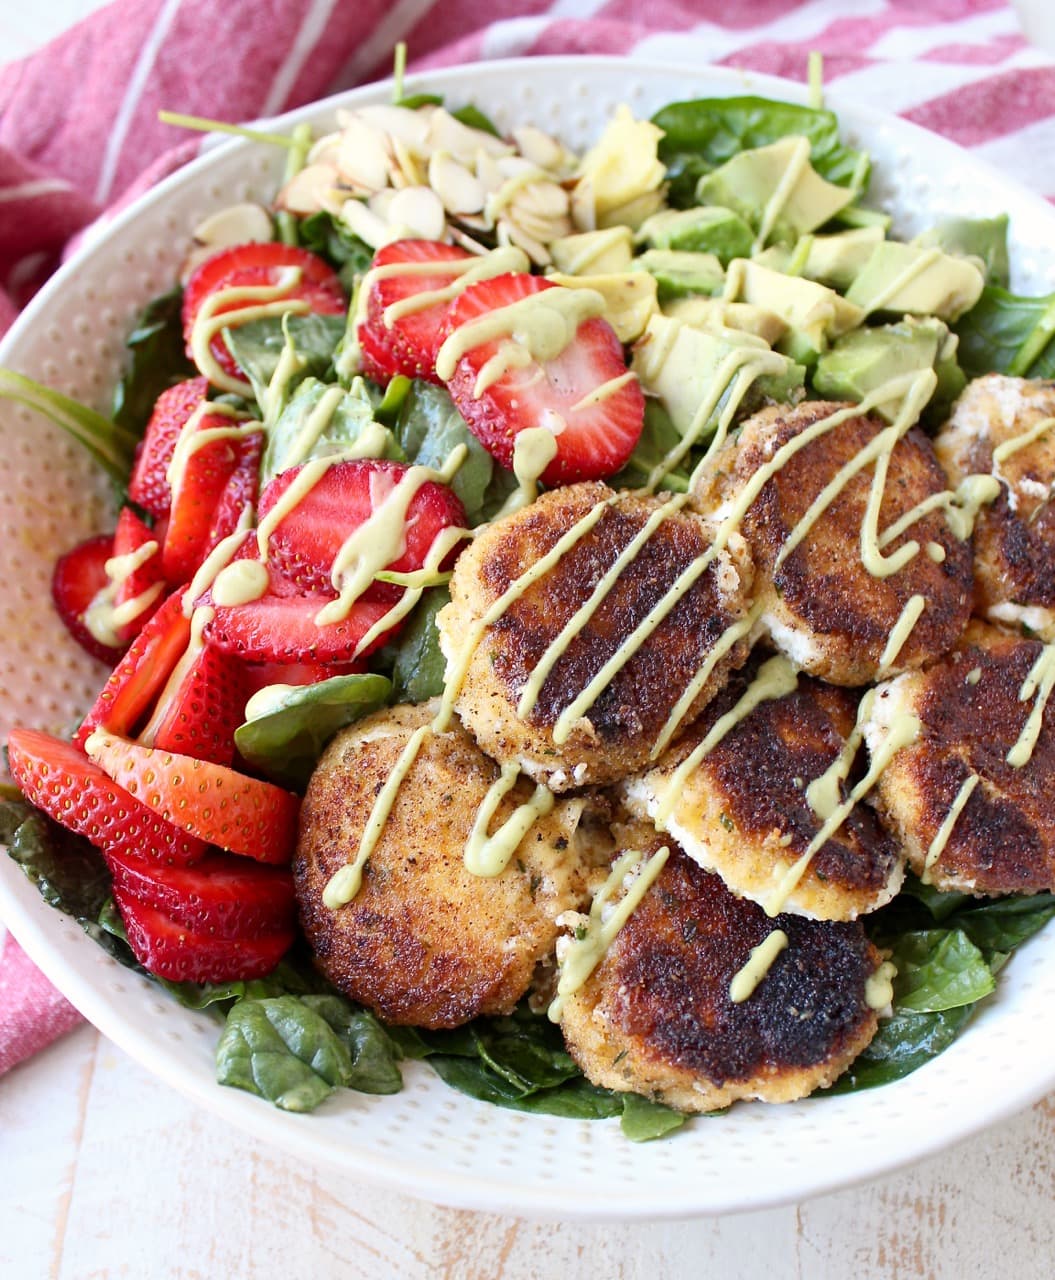 Crispy goat cheese, creamy avocado & juicy strawberries top spinach & arugula, tossed with avocado vinaigrette, for the perfect vegetarian Spring salad!